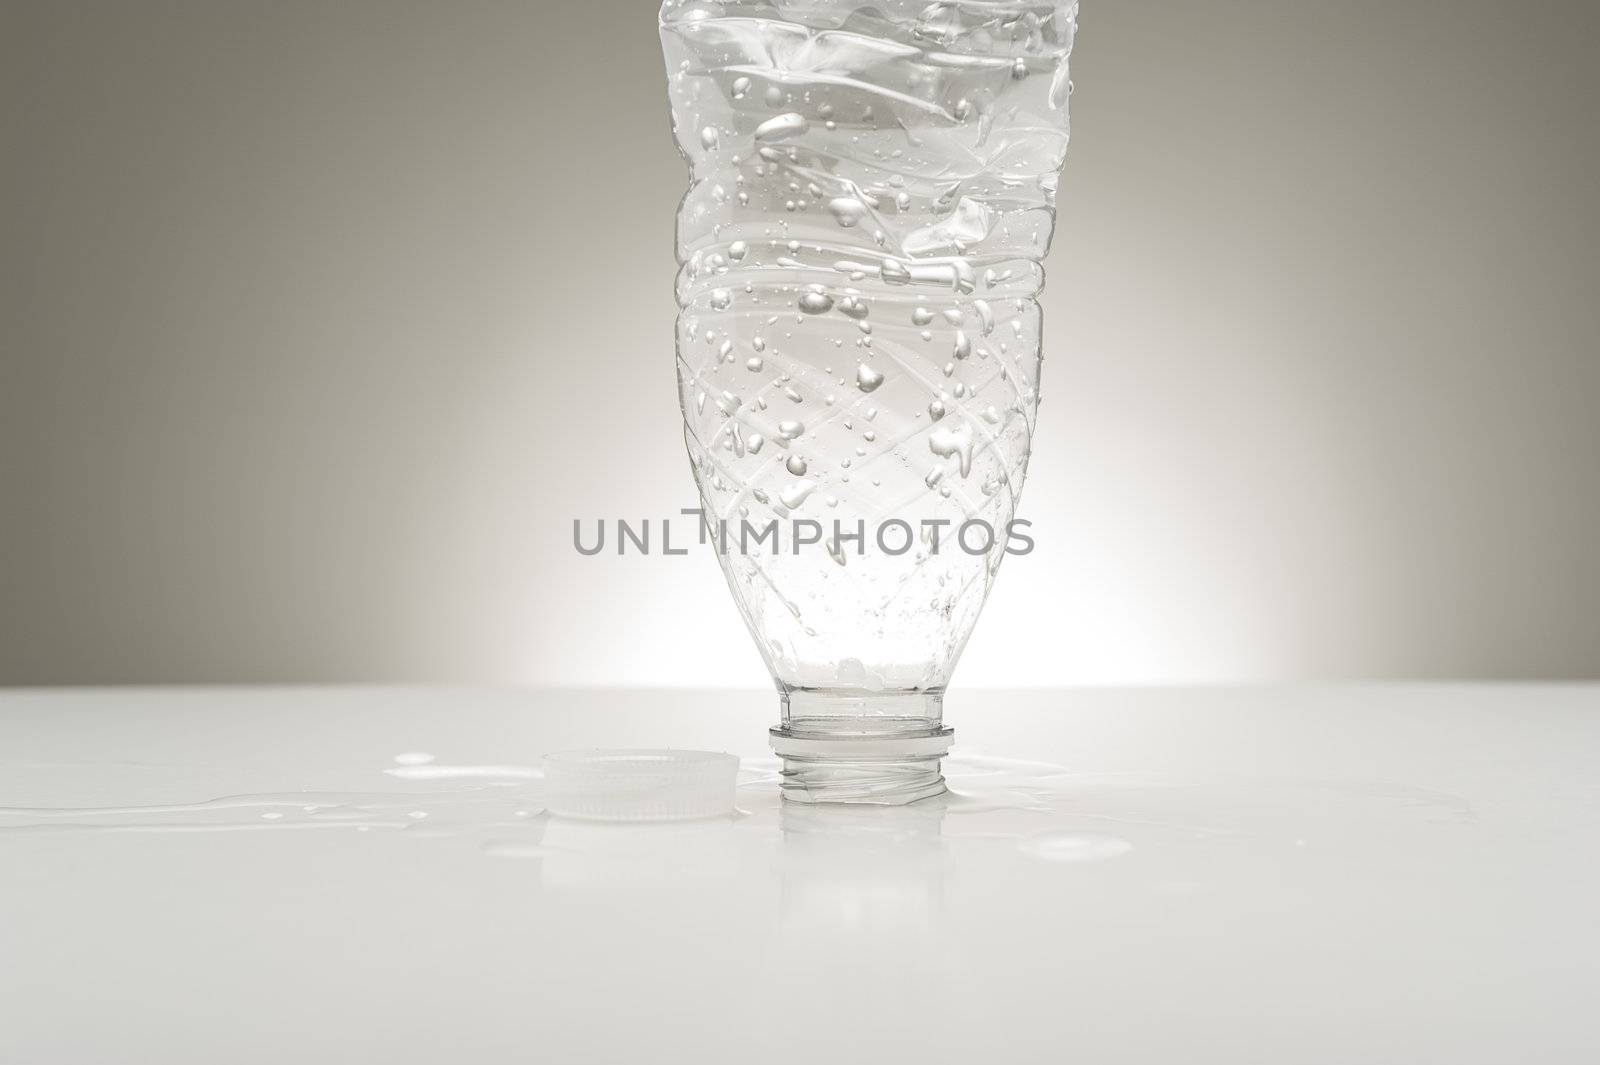 Studio shot of a plastic bottled covered in water droplets upended on a countertop surrounded by spillage conceptual of pure bure bottled water